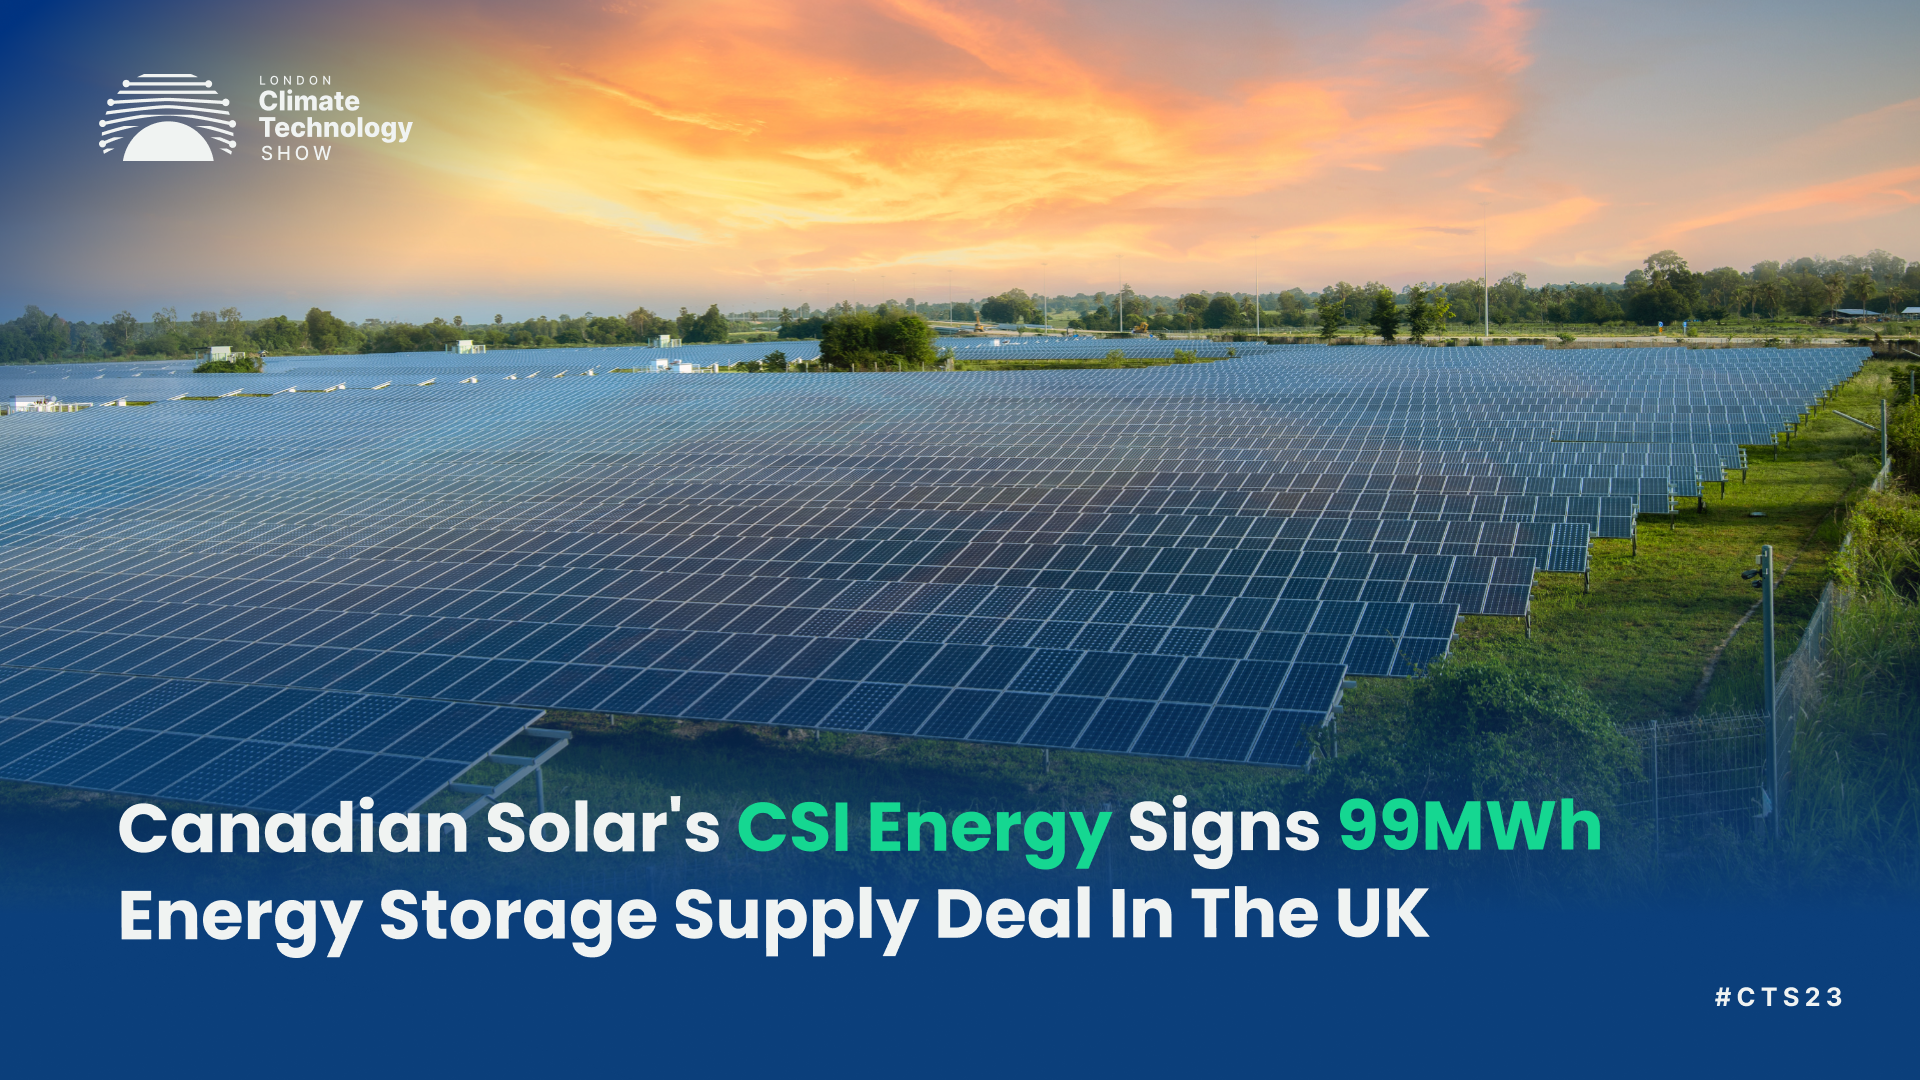 Canadian Solar's CSI Energy Signs 99MWh Energy Storage Supply Deal In The UK